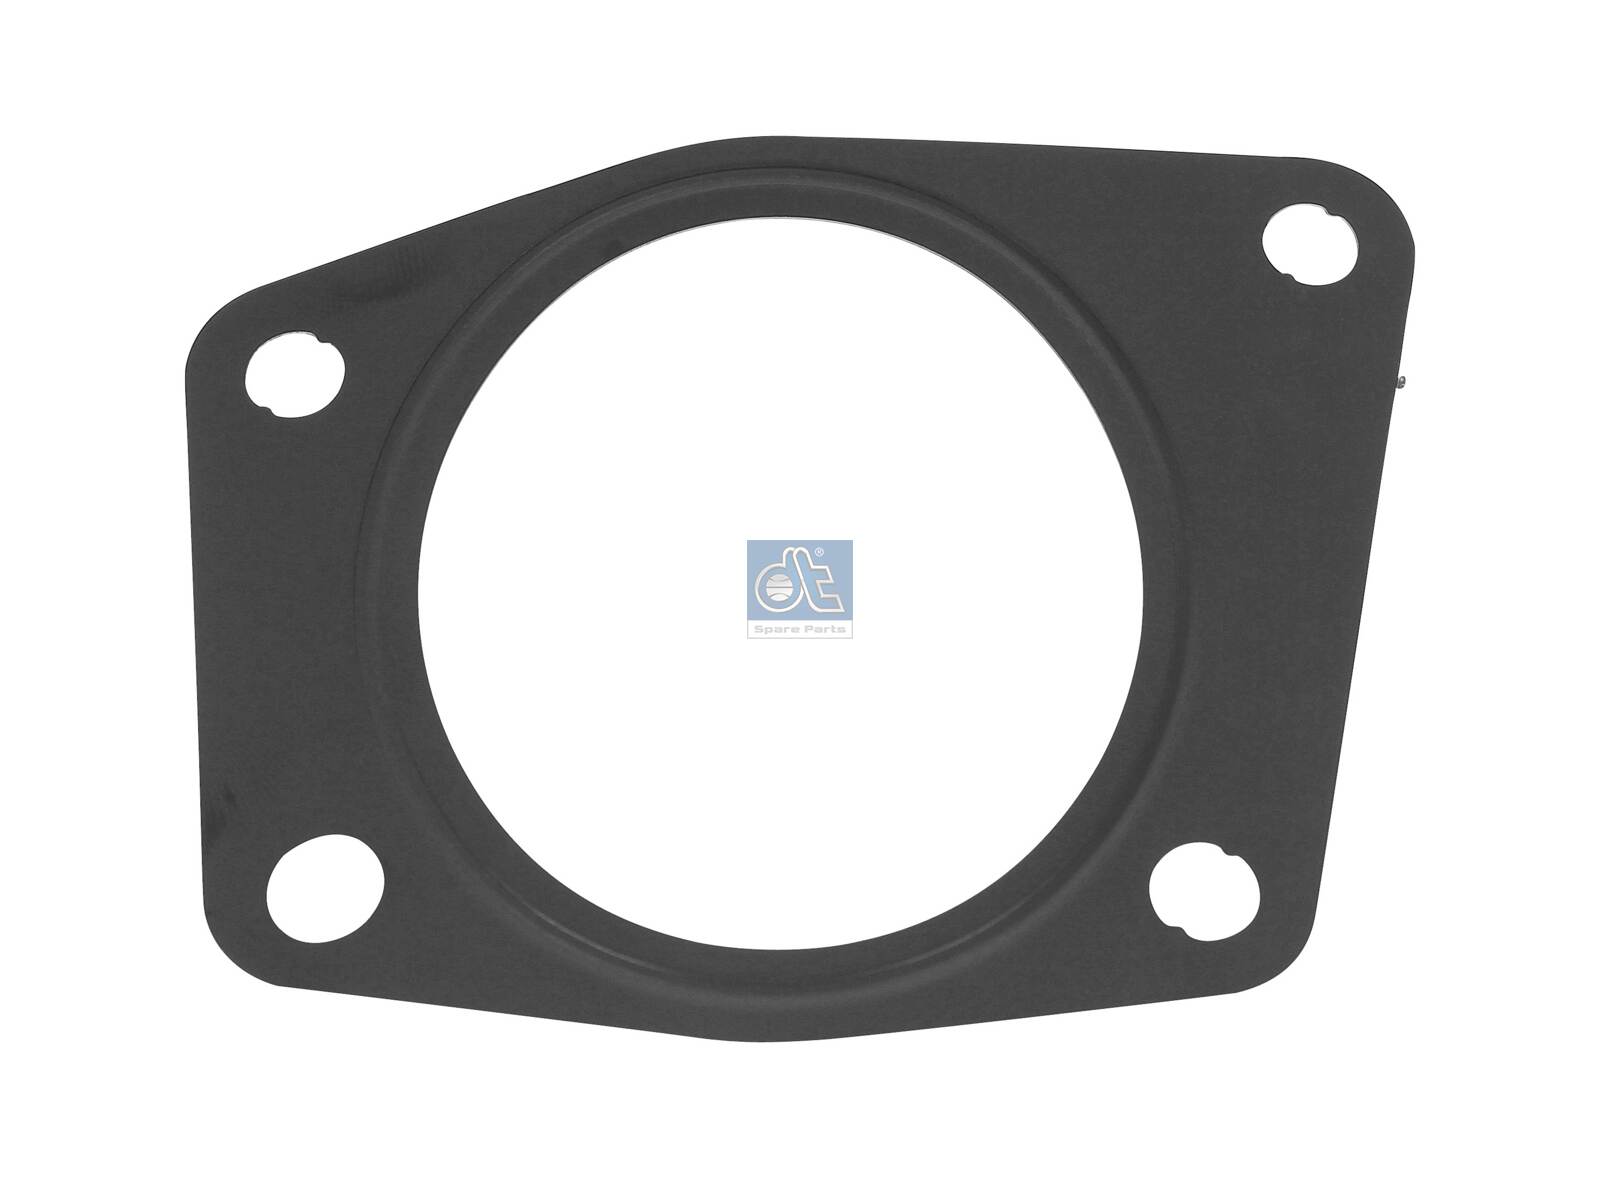 2.11428, Gasket, housing cover (crankcase), DT Spare Parts, 7408130185, 8130185, 034.197, 24805.50, 390.280, 70-10998-00, 81086, EPL0185, 034197, 24805.5, 390280, 701099800, 2480550, 70-38134-00, EPL-0185, 248055, 4057795010482, 703813400, 4057795014008